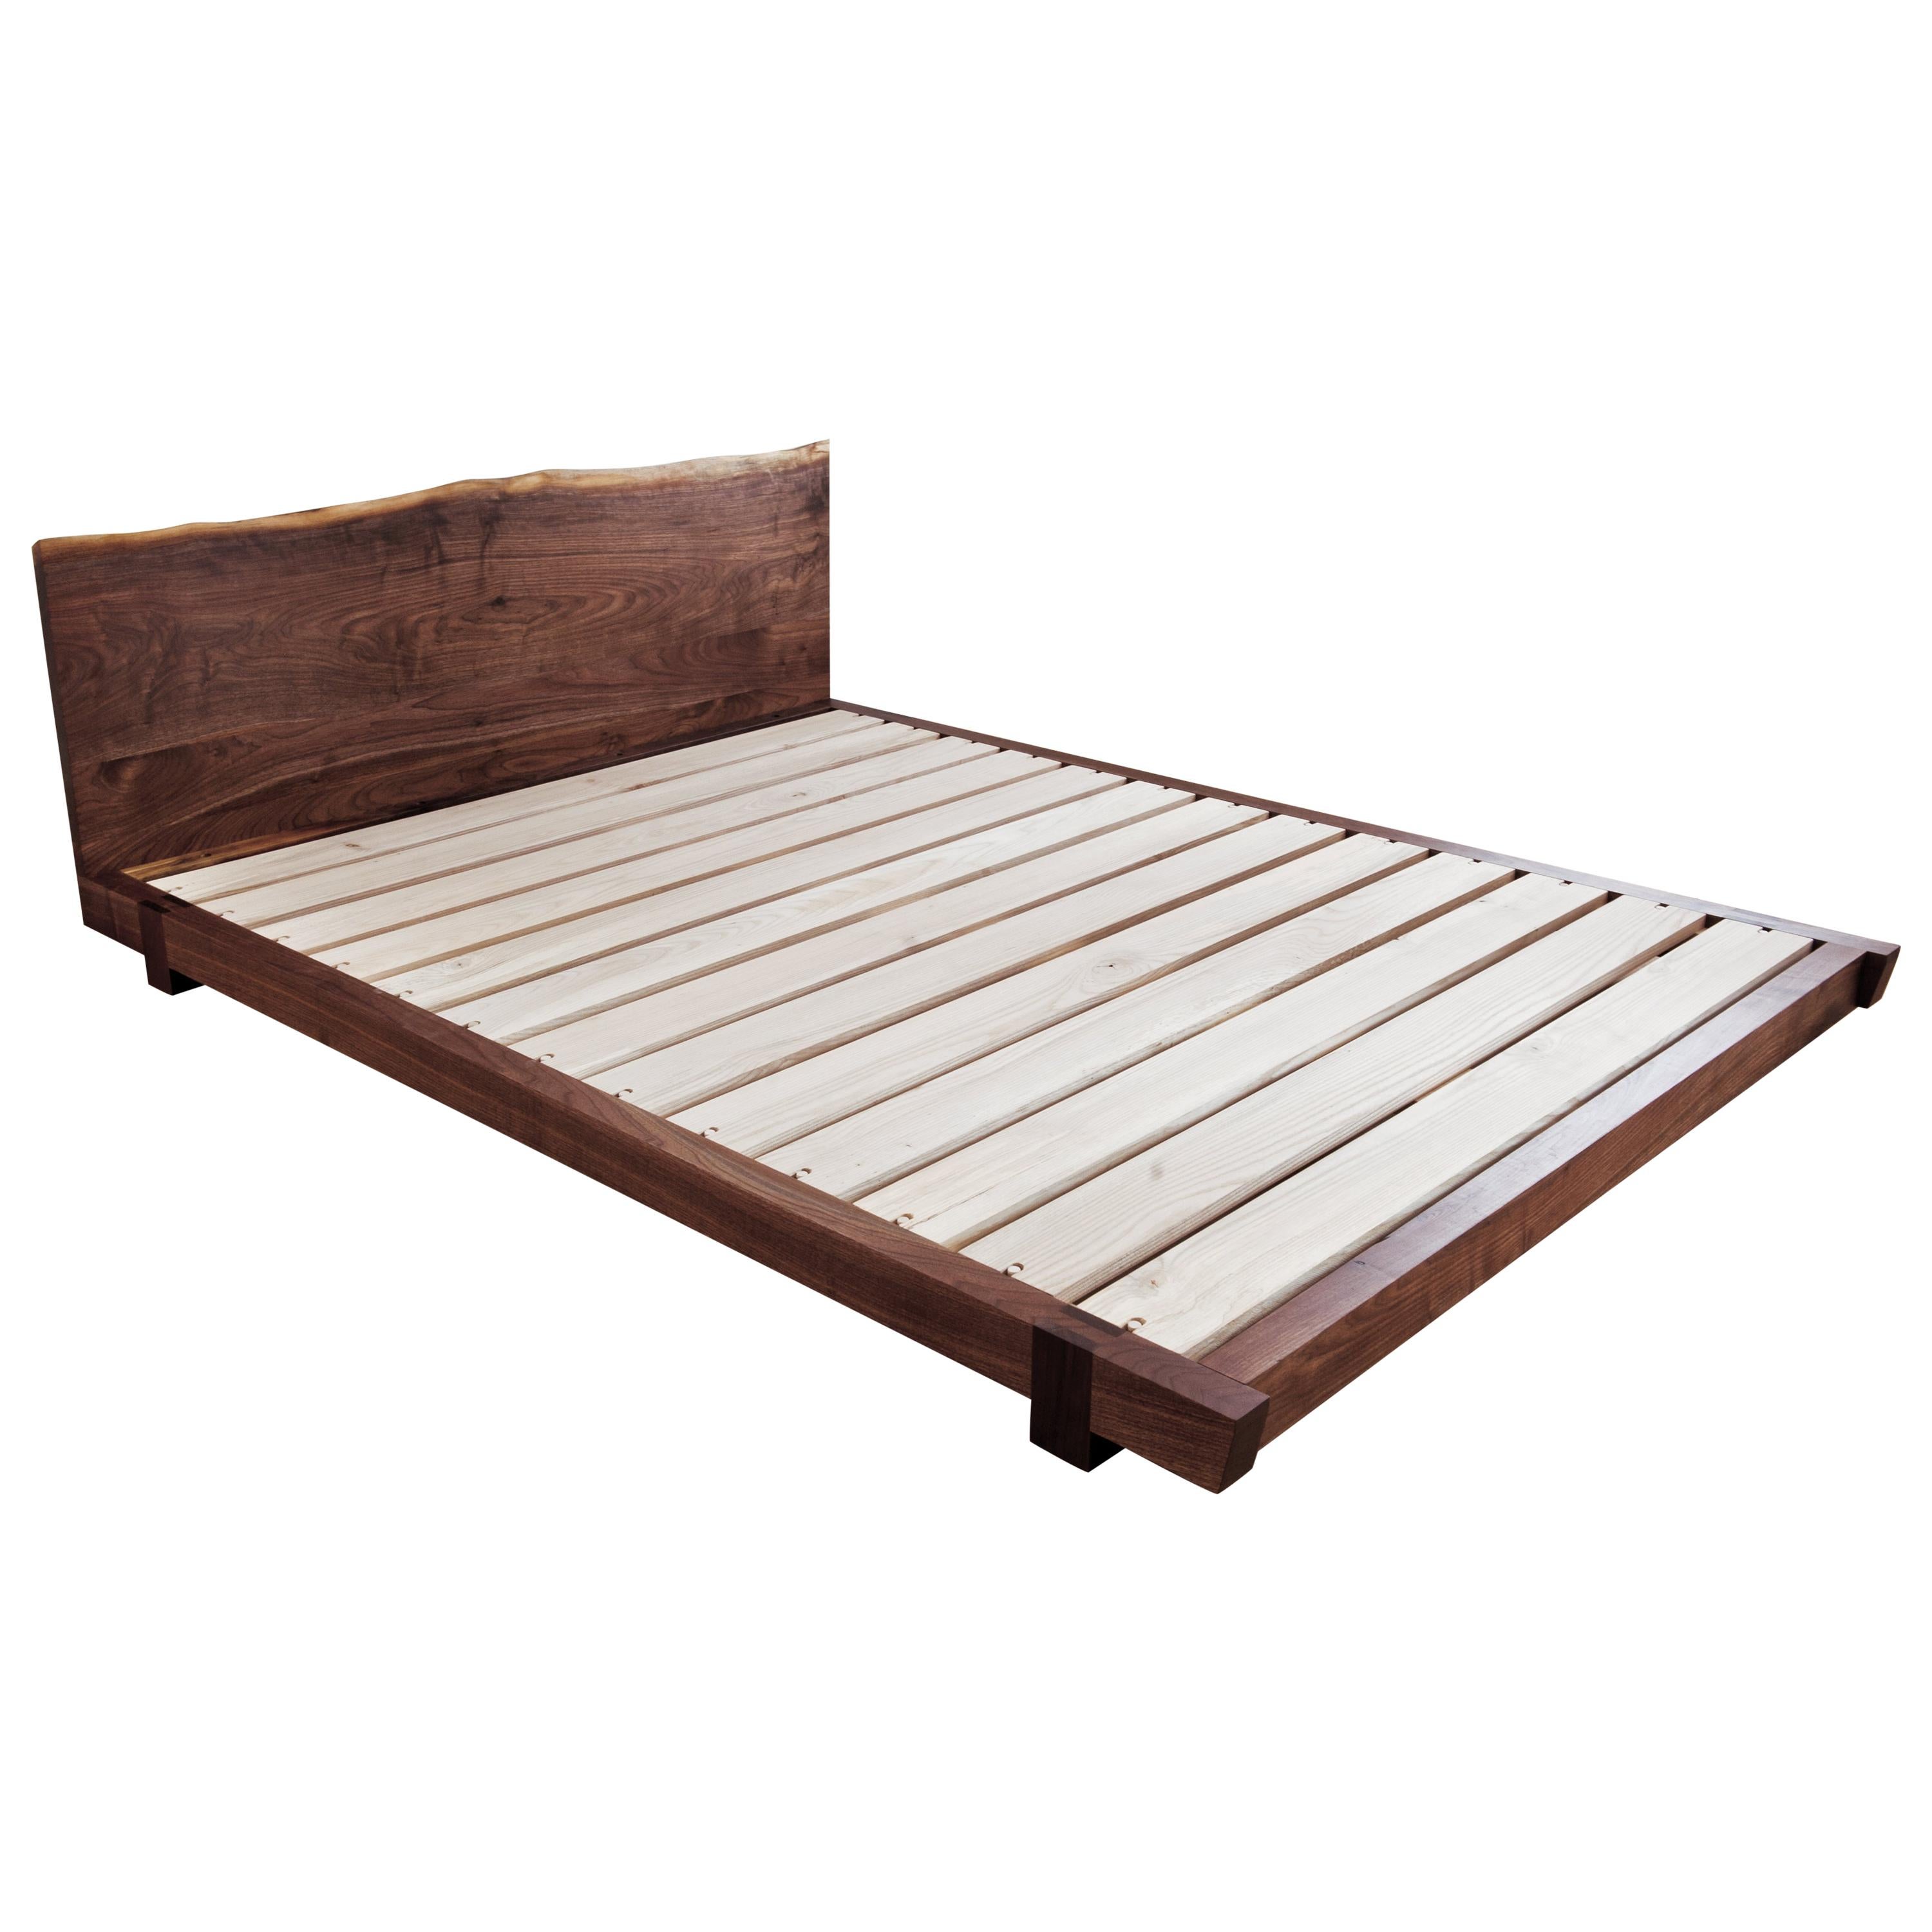 Black Walnut Perri Bed Queen-sized with Sustainable Live-edge Slab Headboard For Sale